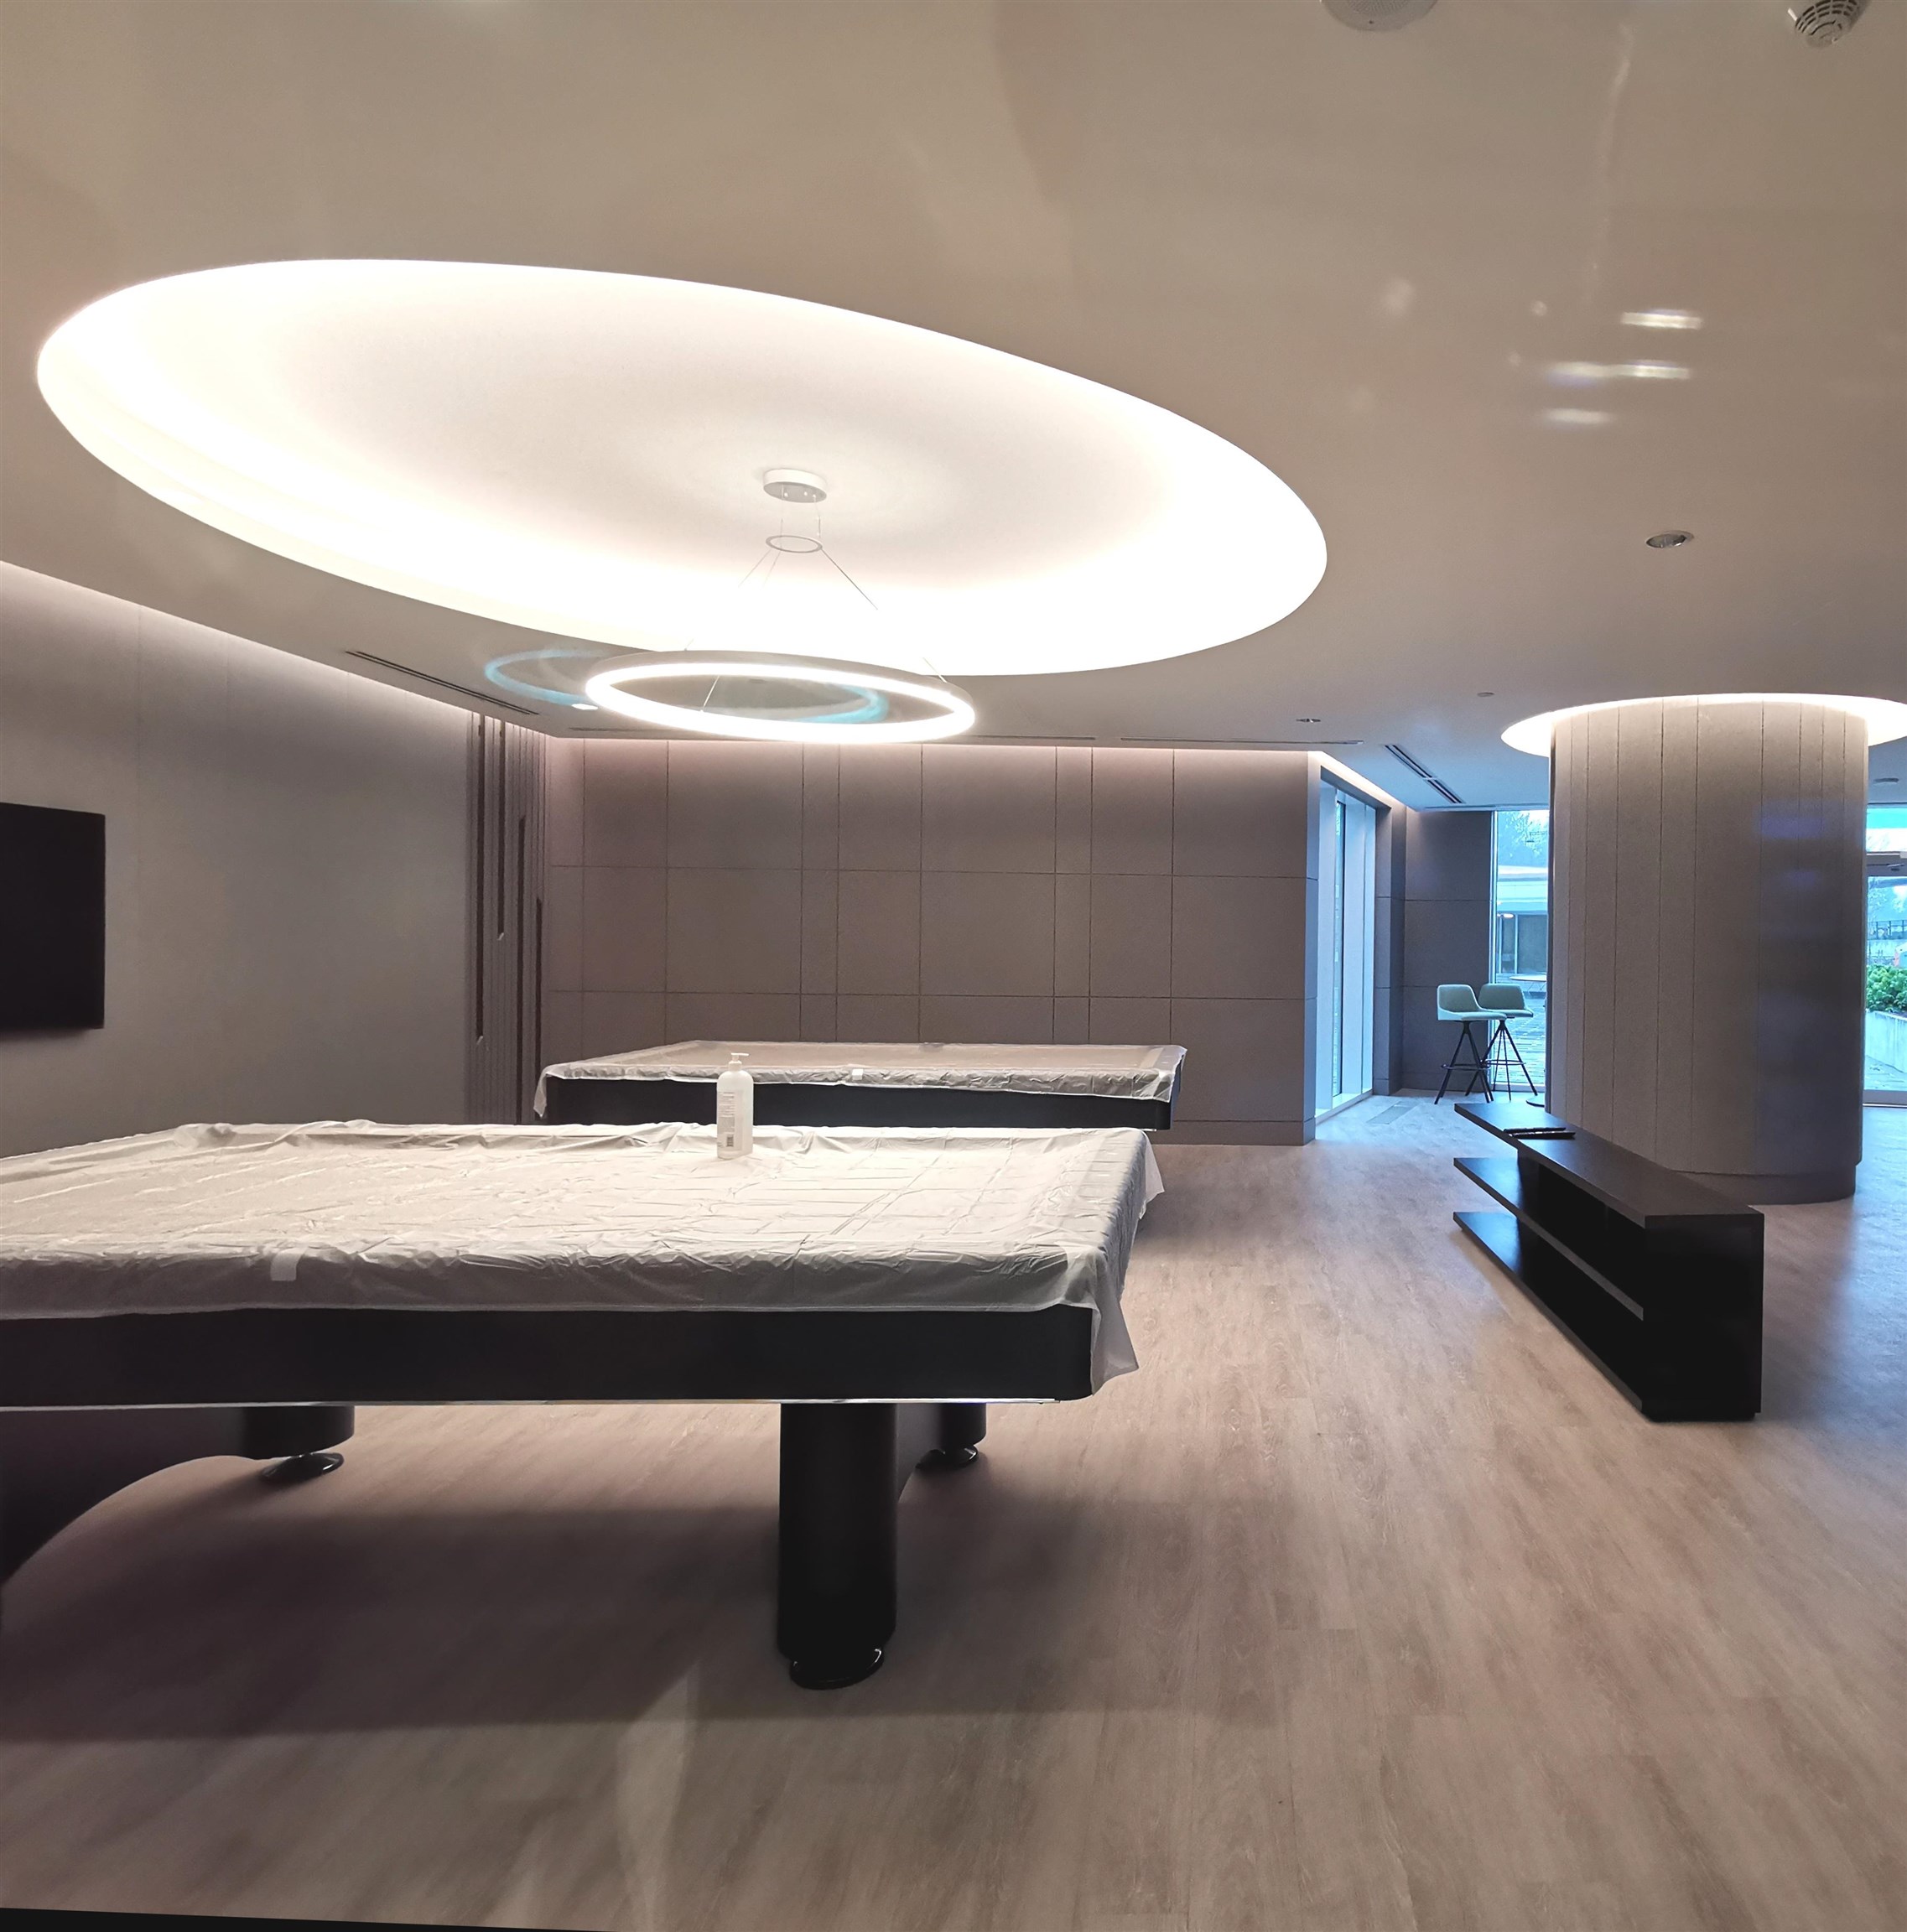 Entertainment room with pool table, and media room